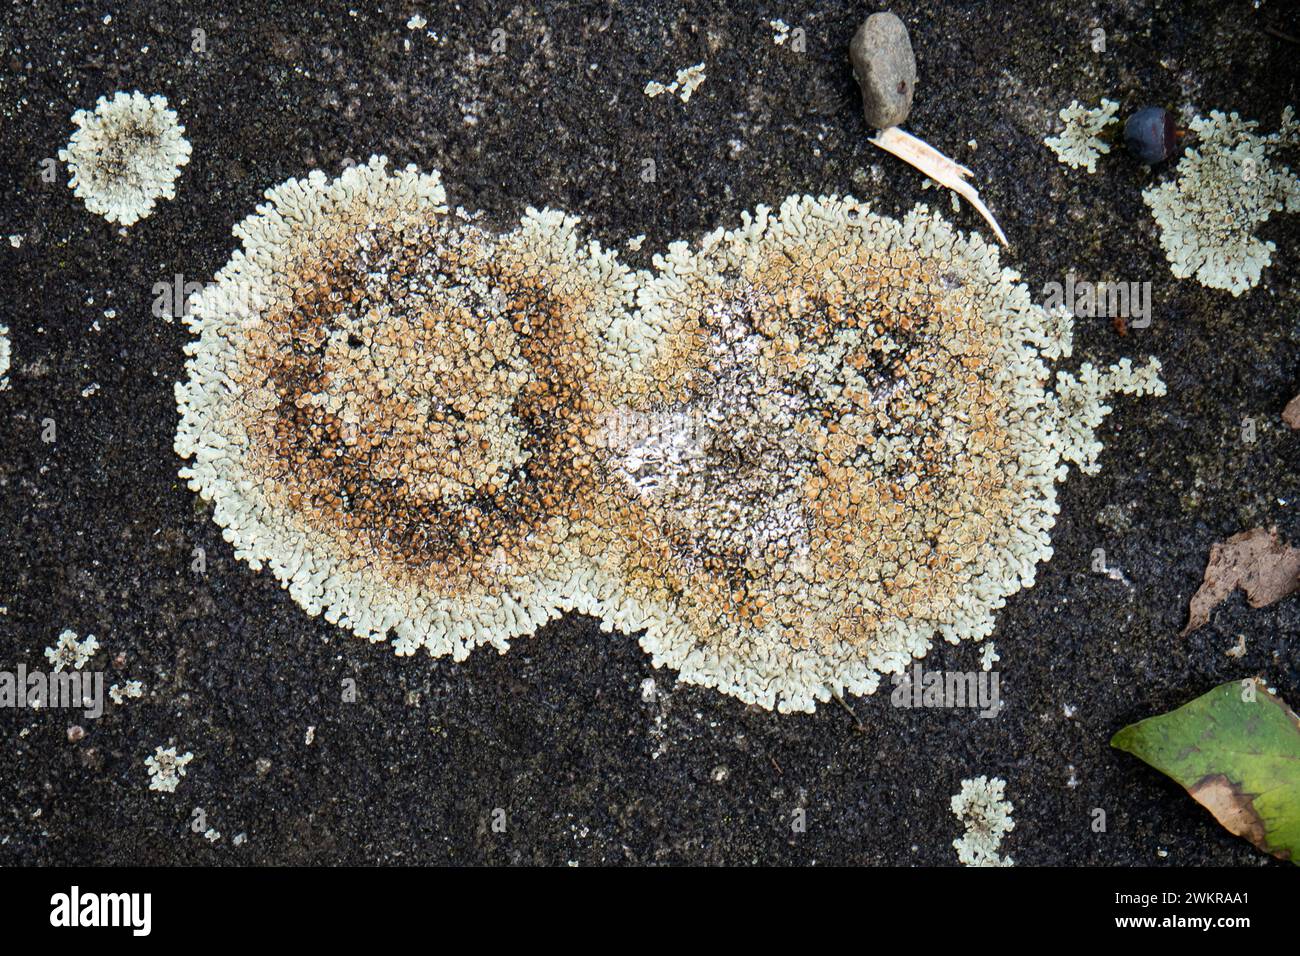 Lichen Lecanora or stone lichen growing. Top view, close up shot, no people. Stock Photo